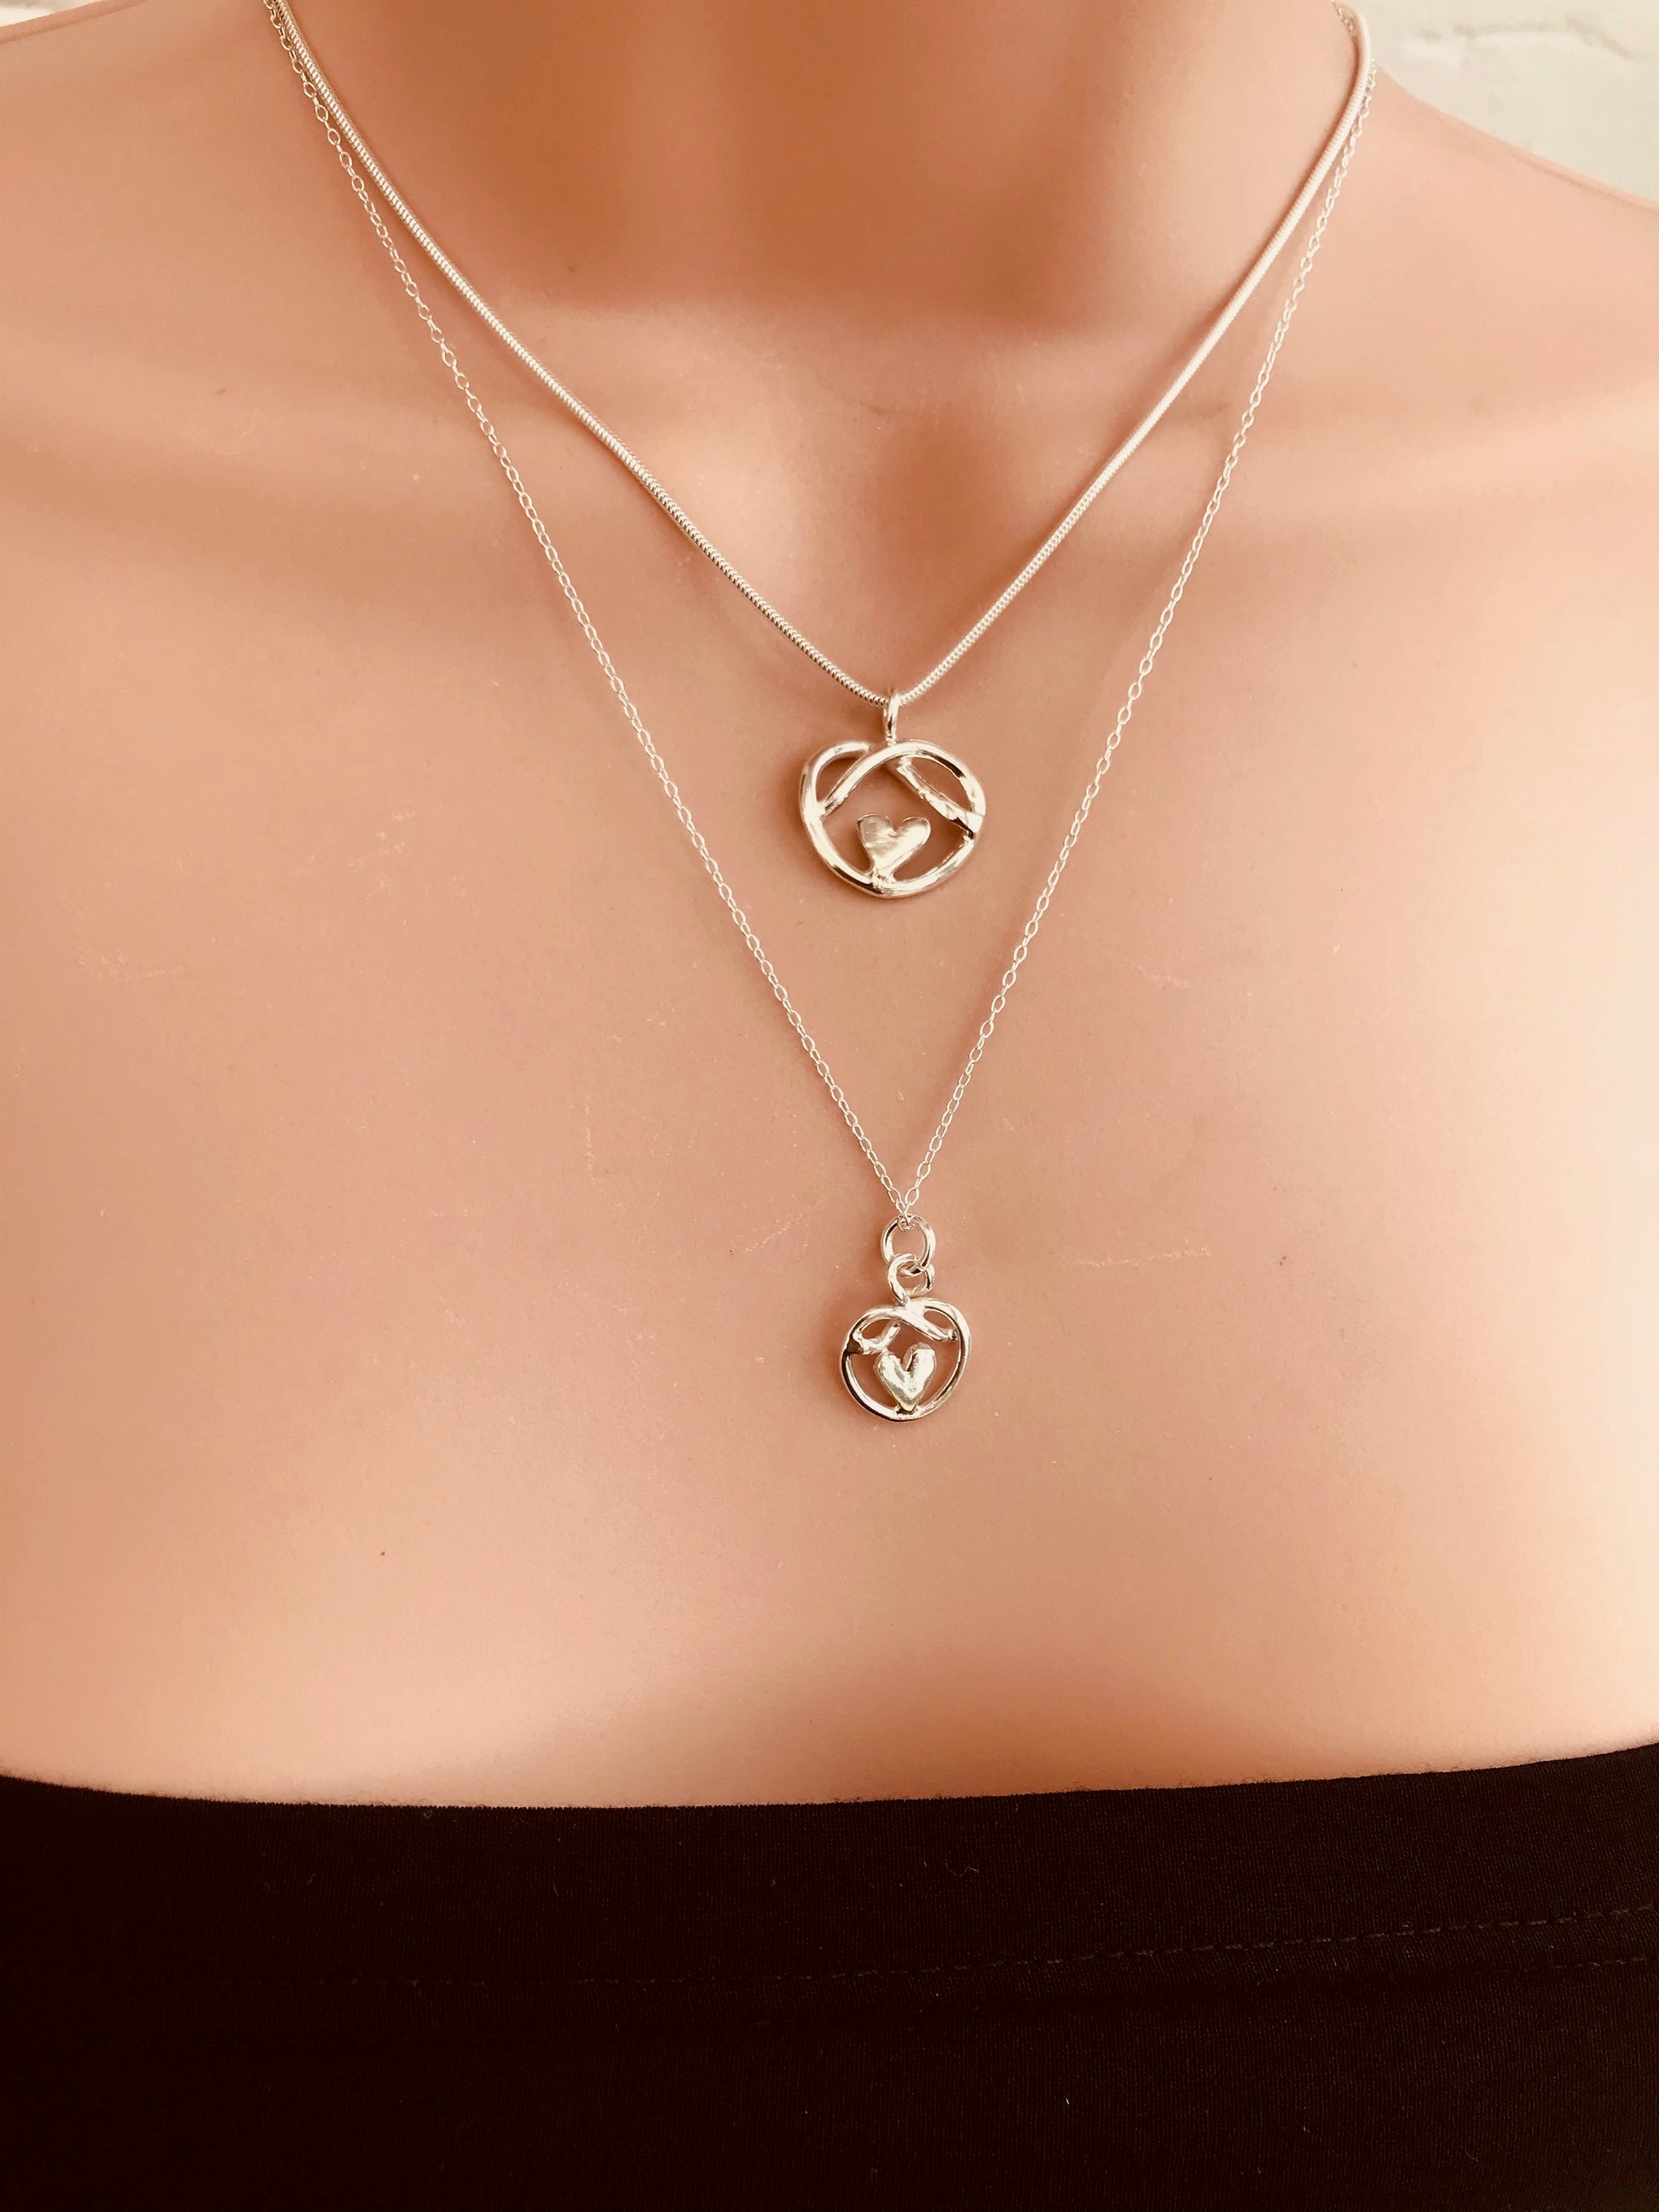 Small and medium heart knot necklaces